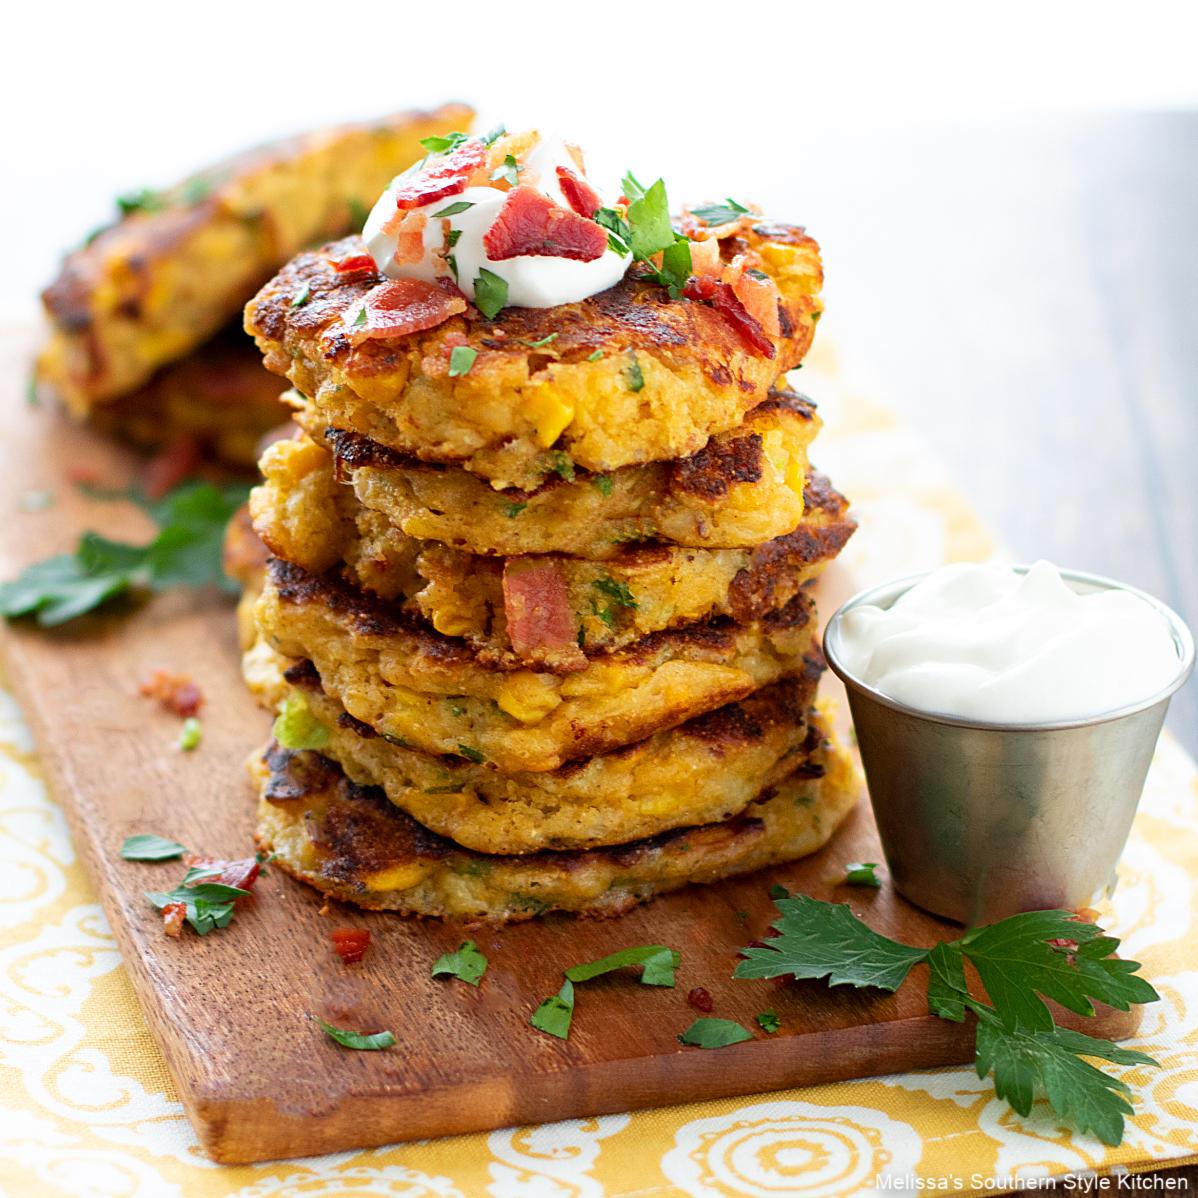  Corn cakes so good, you won't need a side dish